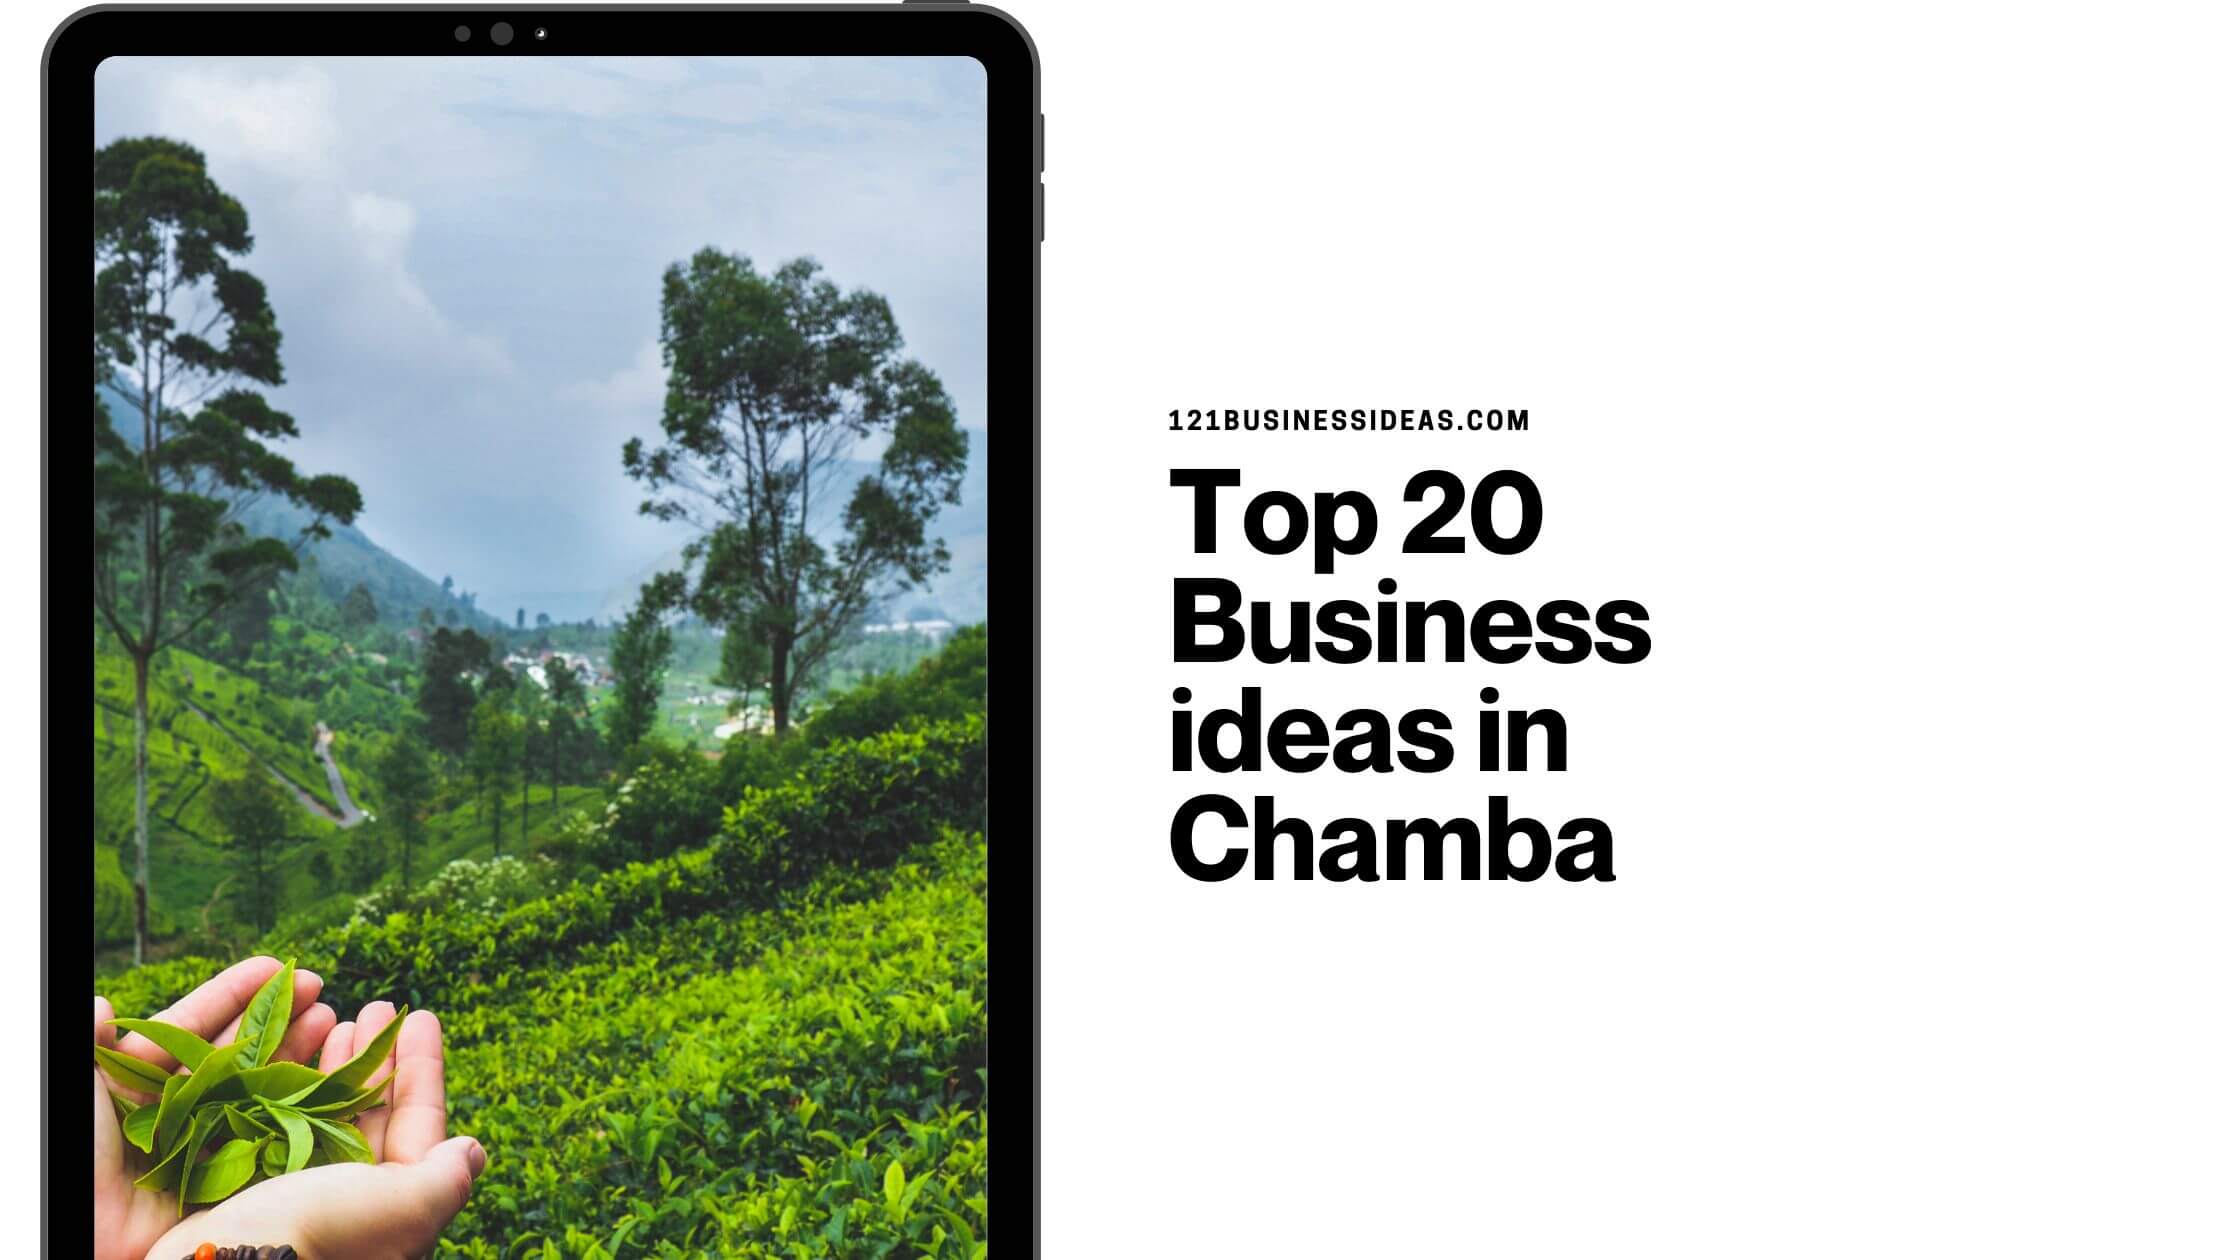 Top 20 Business ideas in Chamba (1)